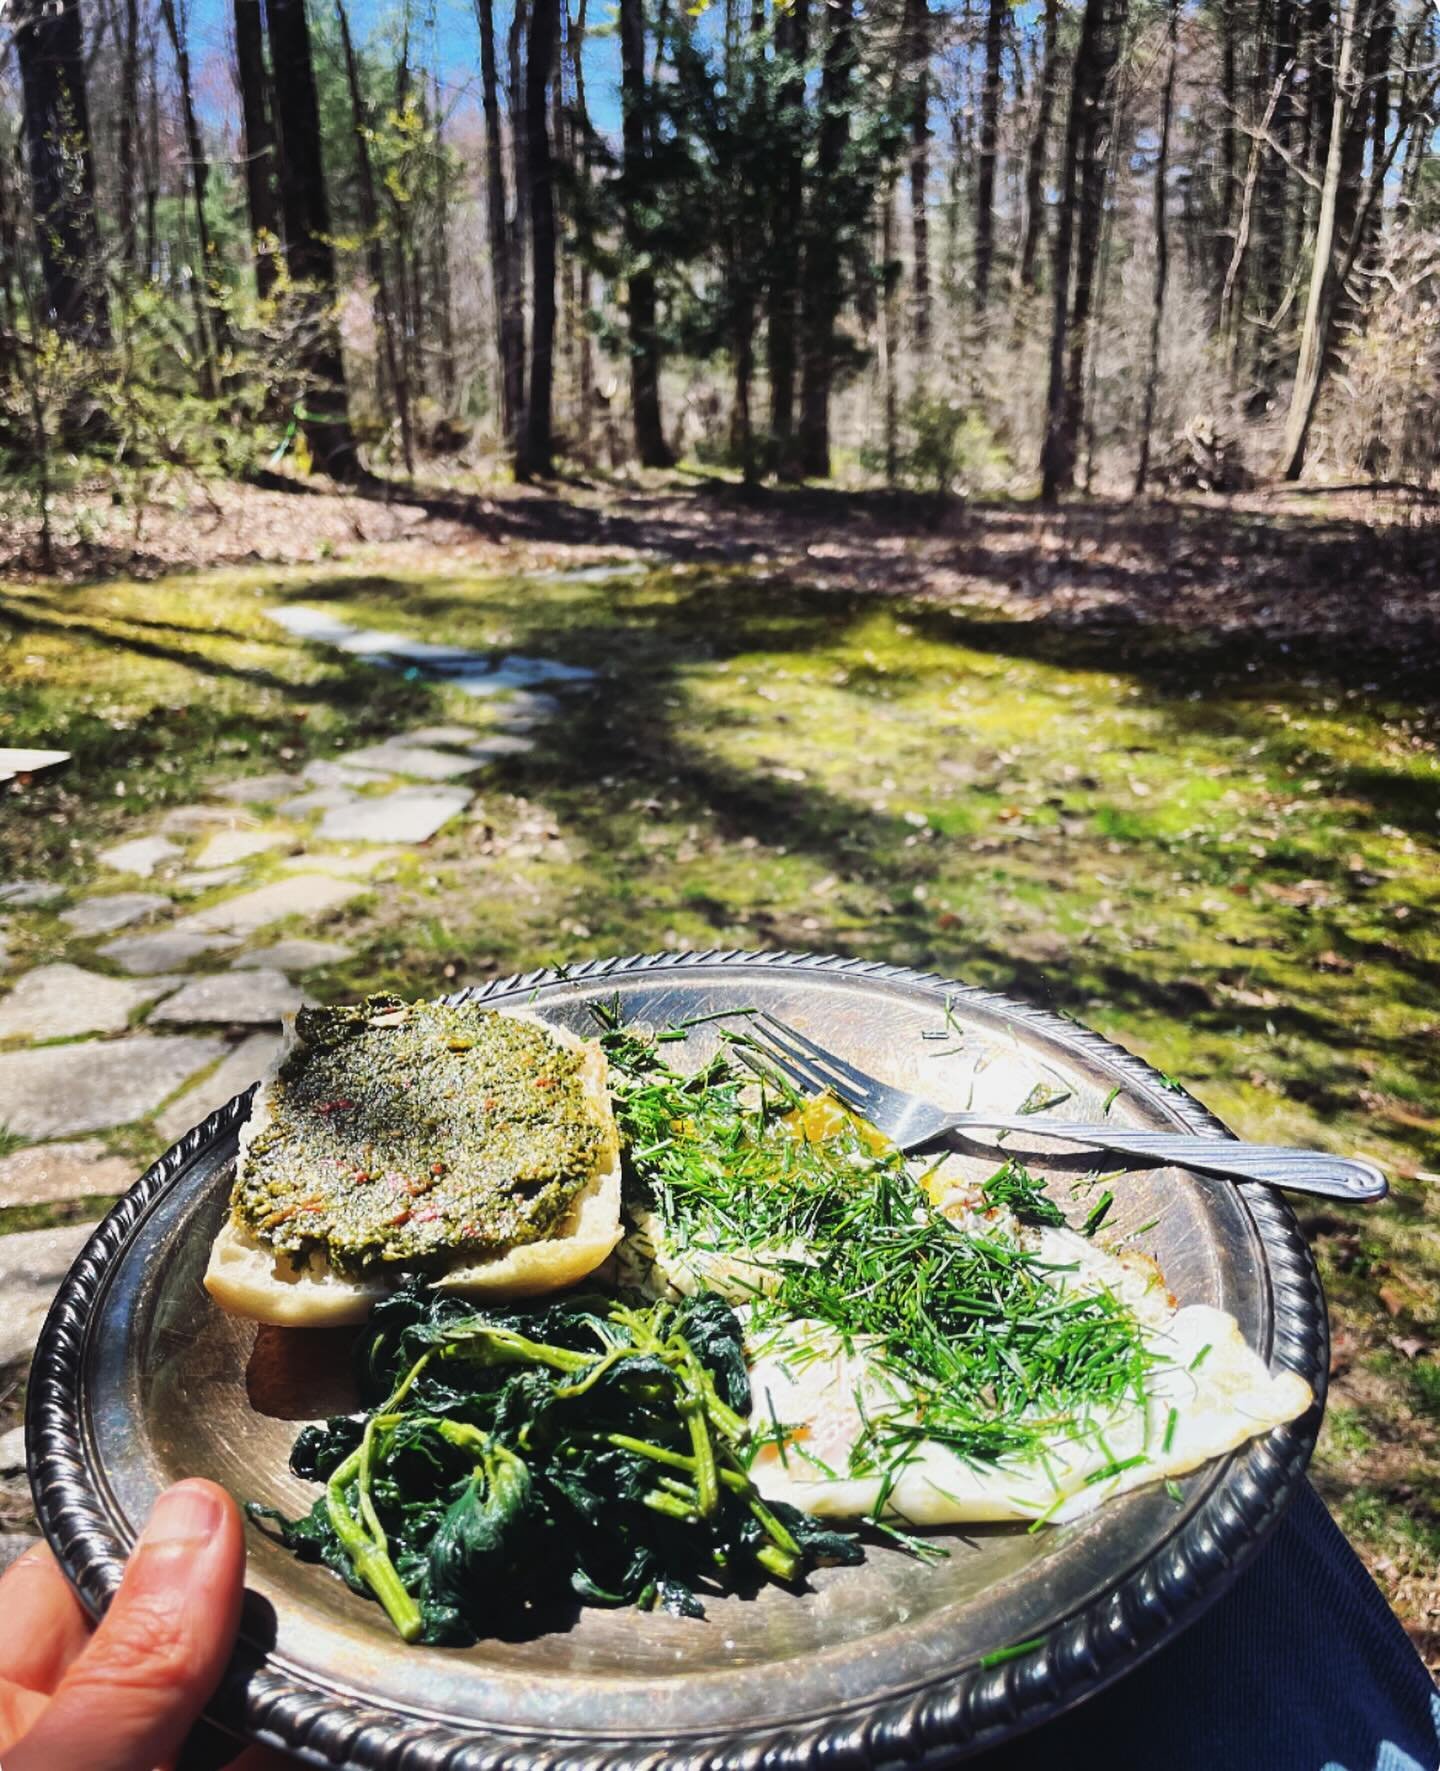 Blessed May Day, Beltane and Floralia all!🌸🌸🌸

Making a wild food-infused dish is a wonderful way to celebrate Beltane💐  Lately I've been making a tangy spring pesto I wanted to share, but I also want to encourage you all to be creative! When it 